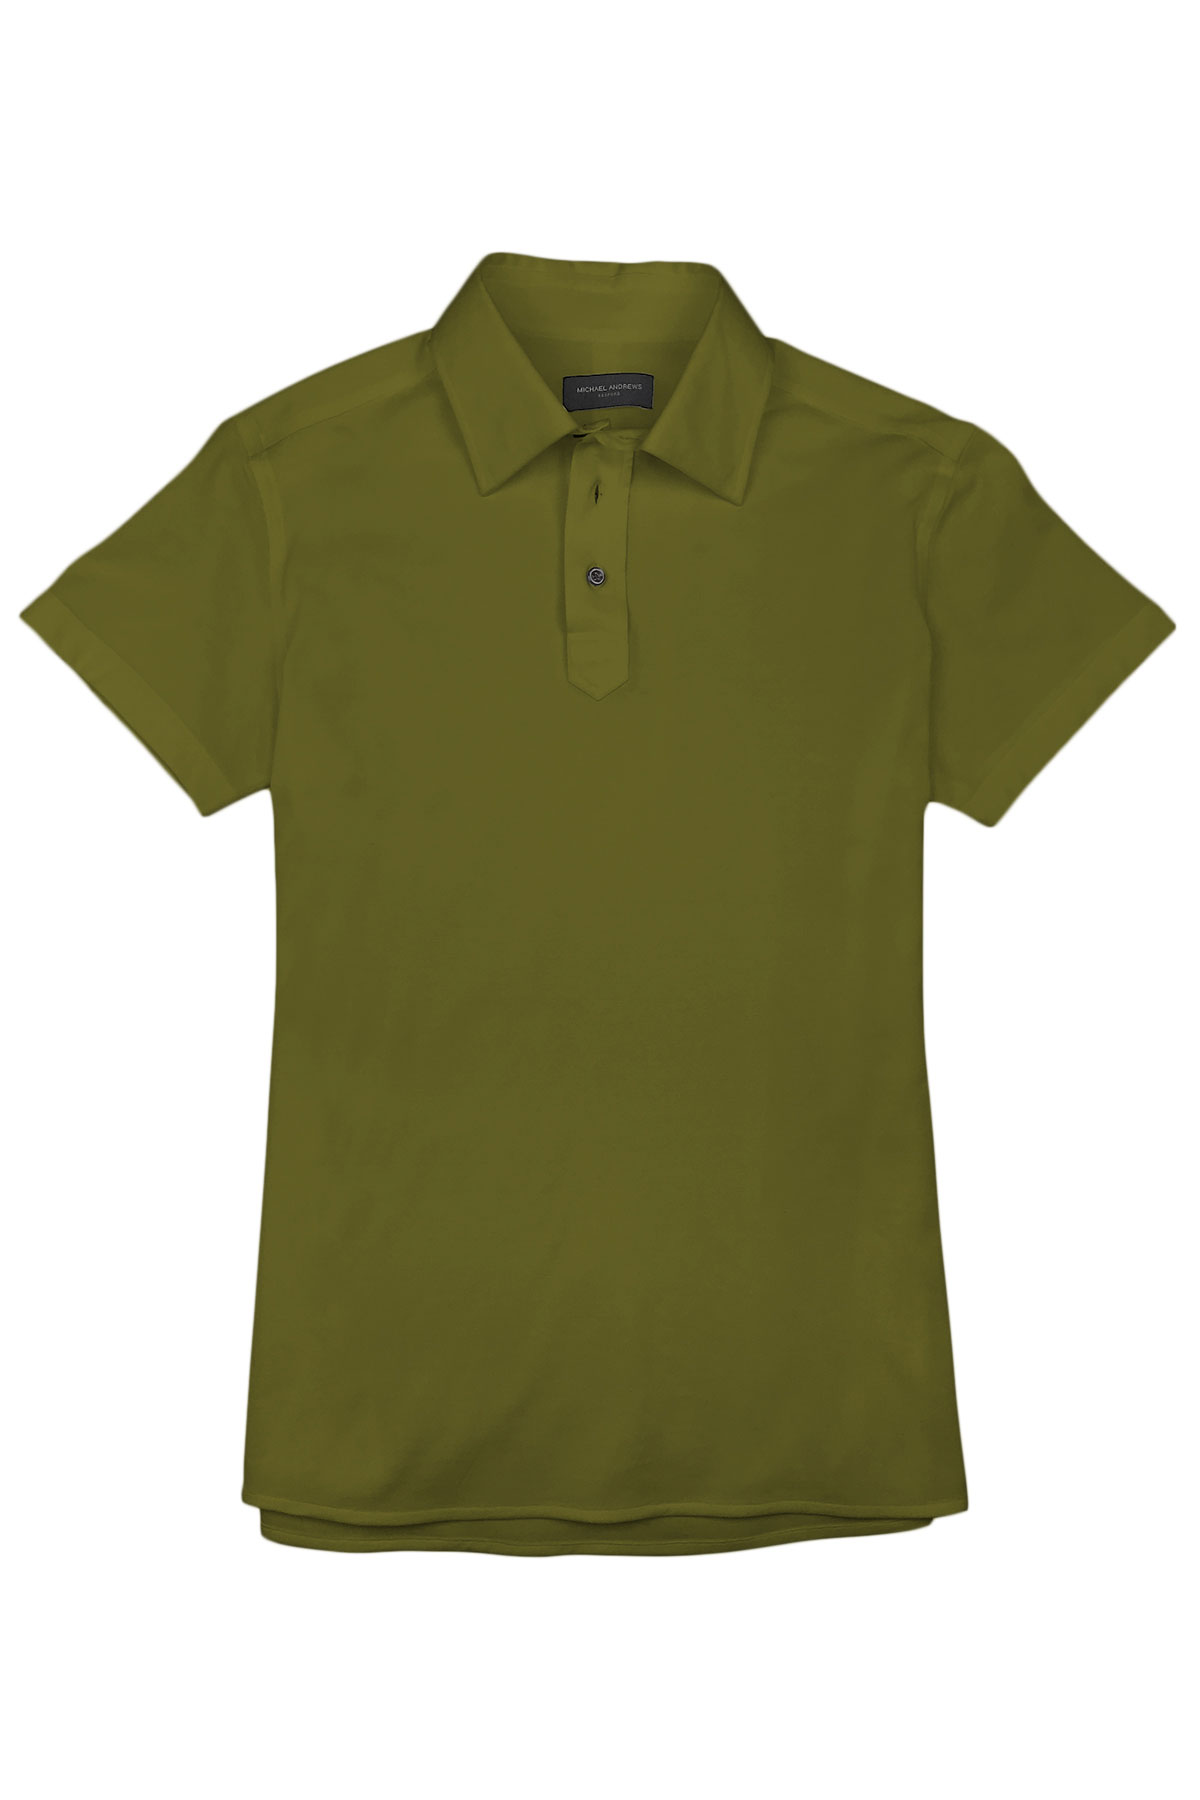 Classic Short Sleeve Stone Washed Military Green Pique Polo Shirt